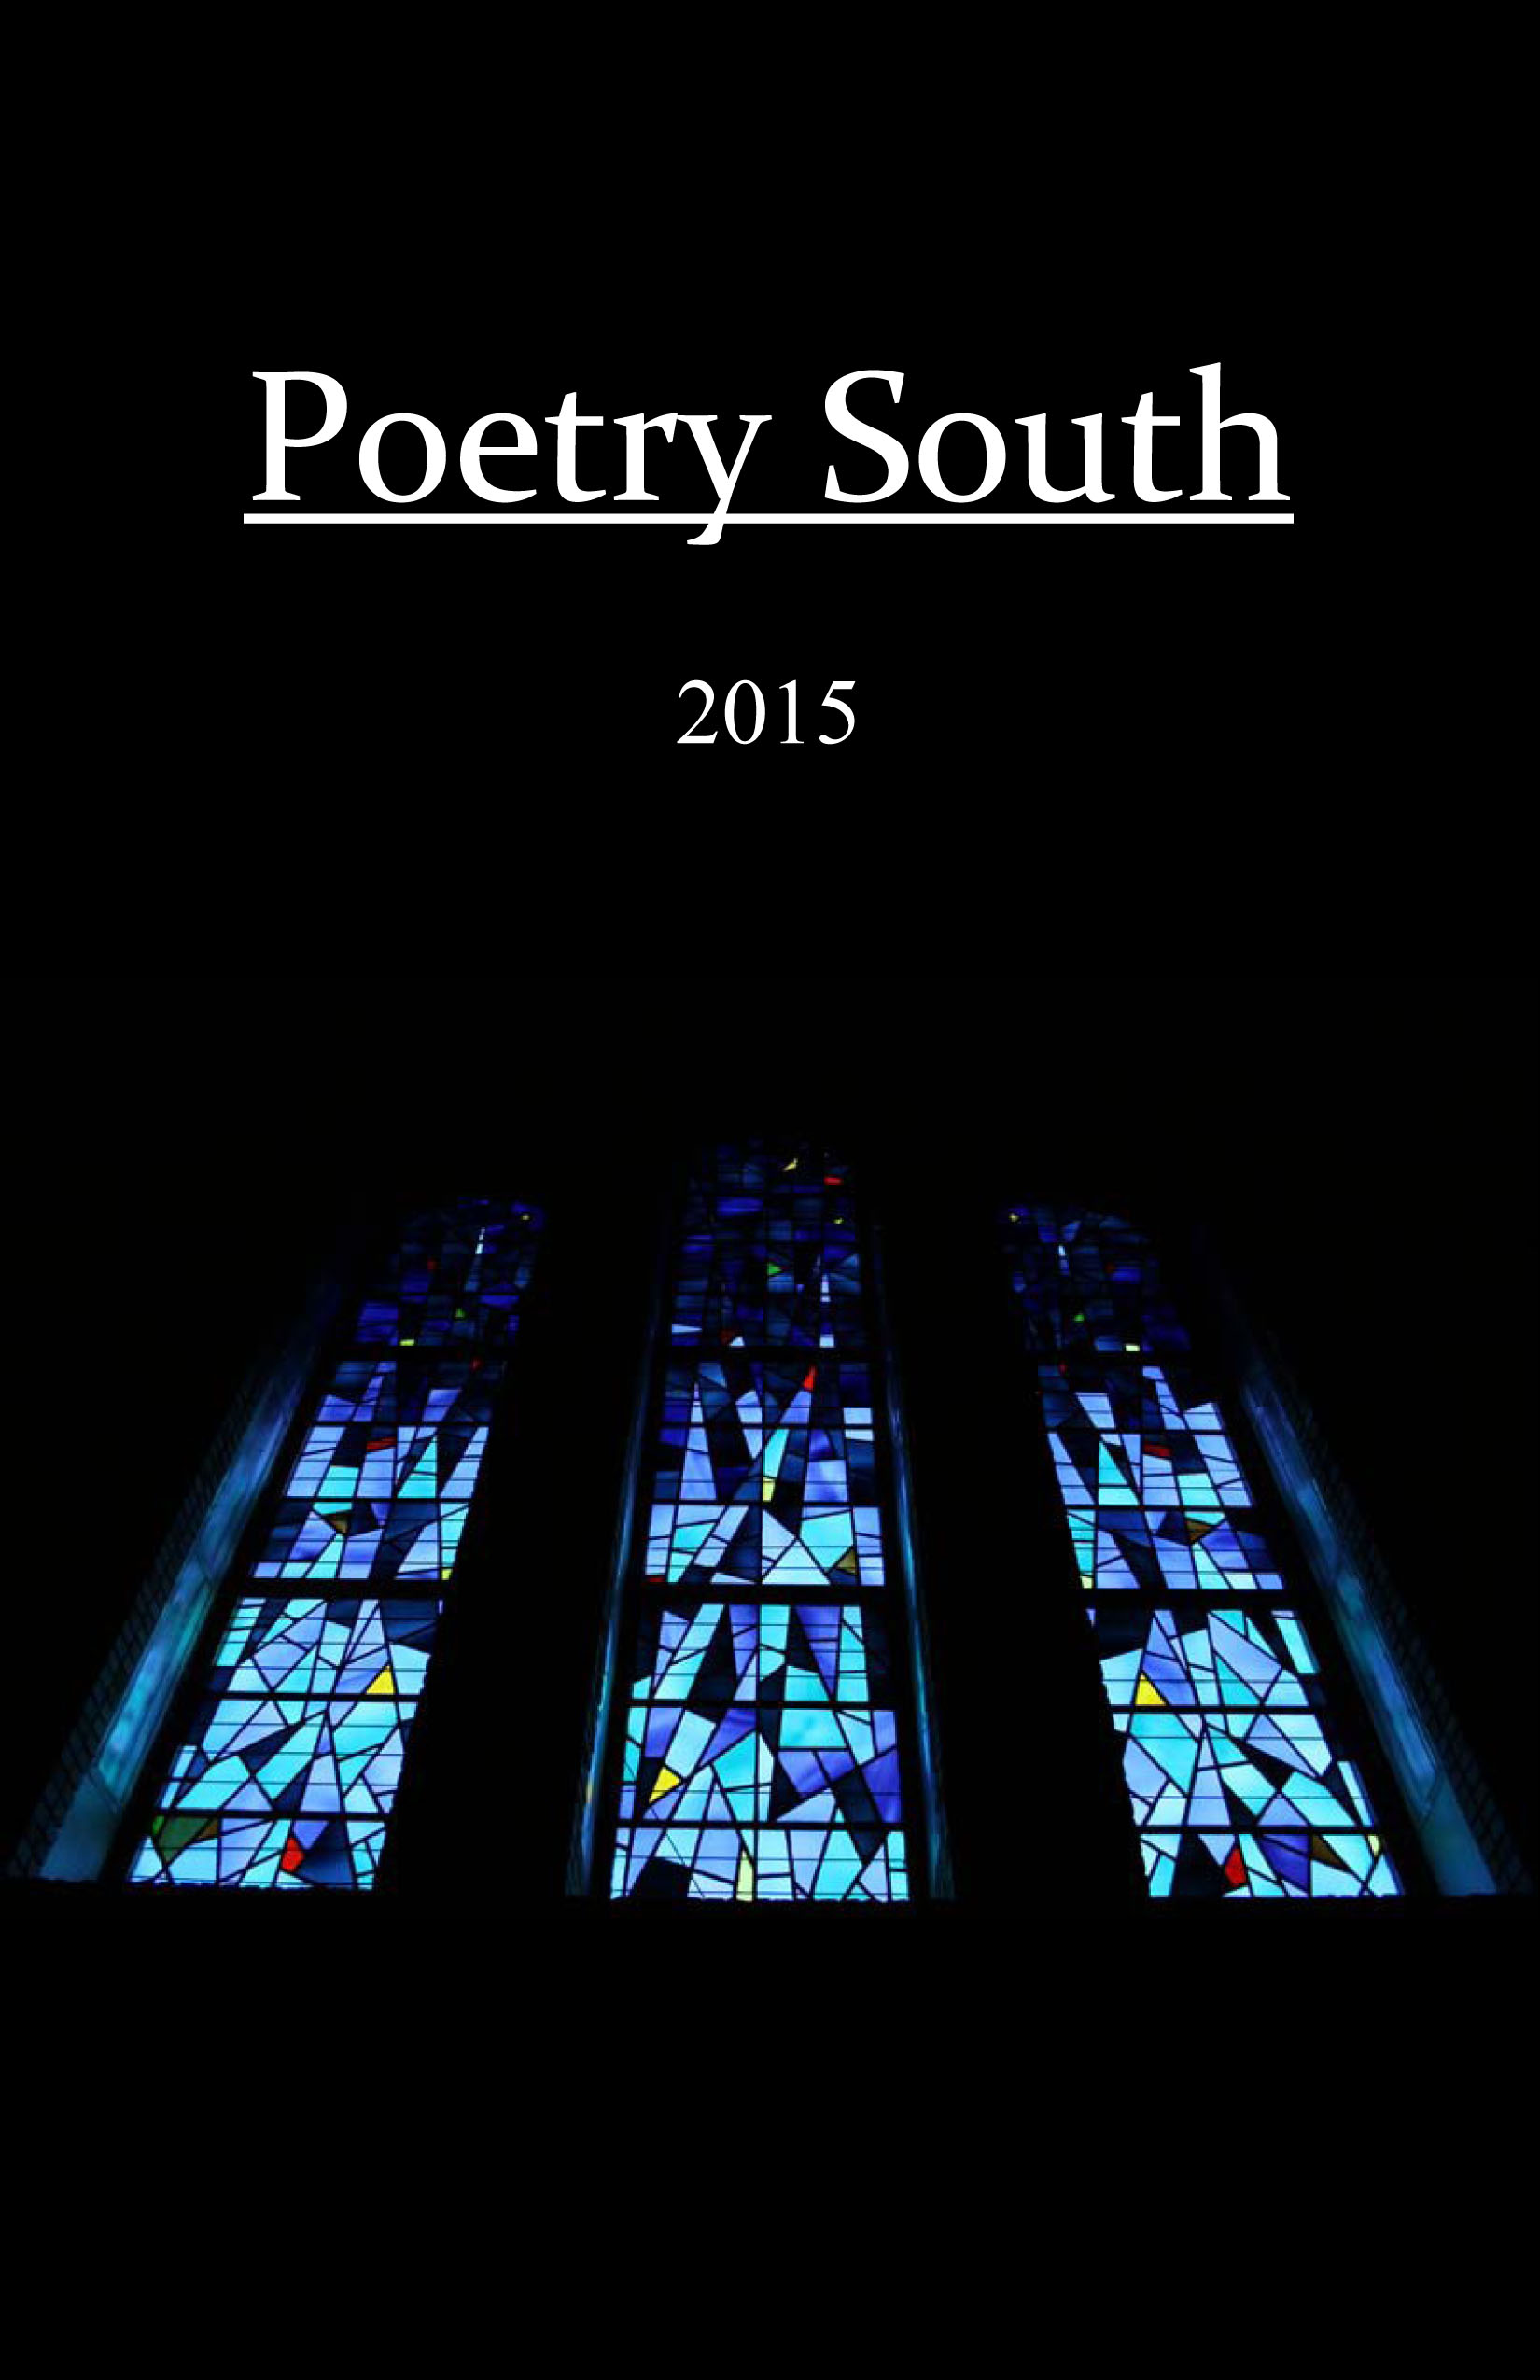 Poetry South 2015 FrontCover